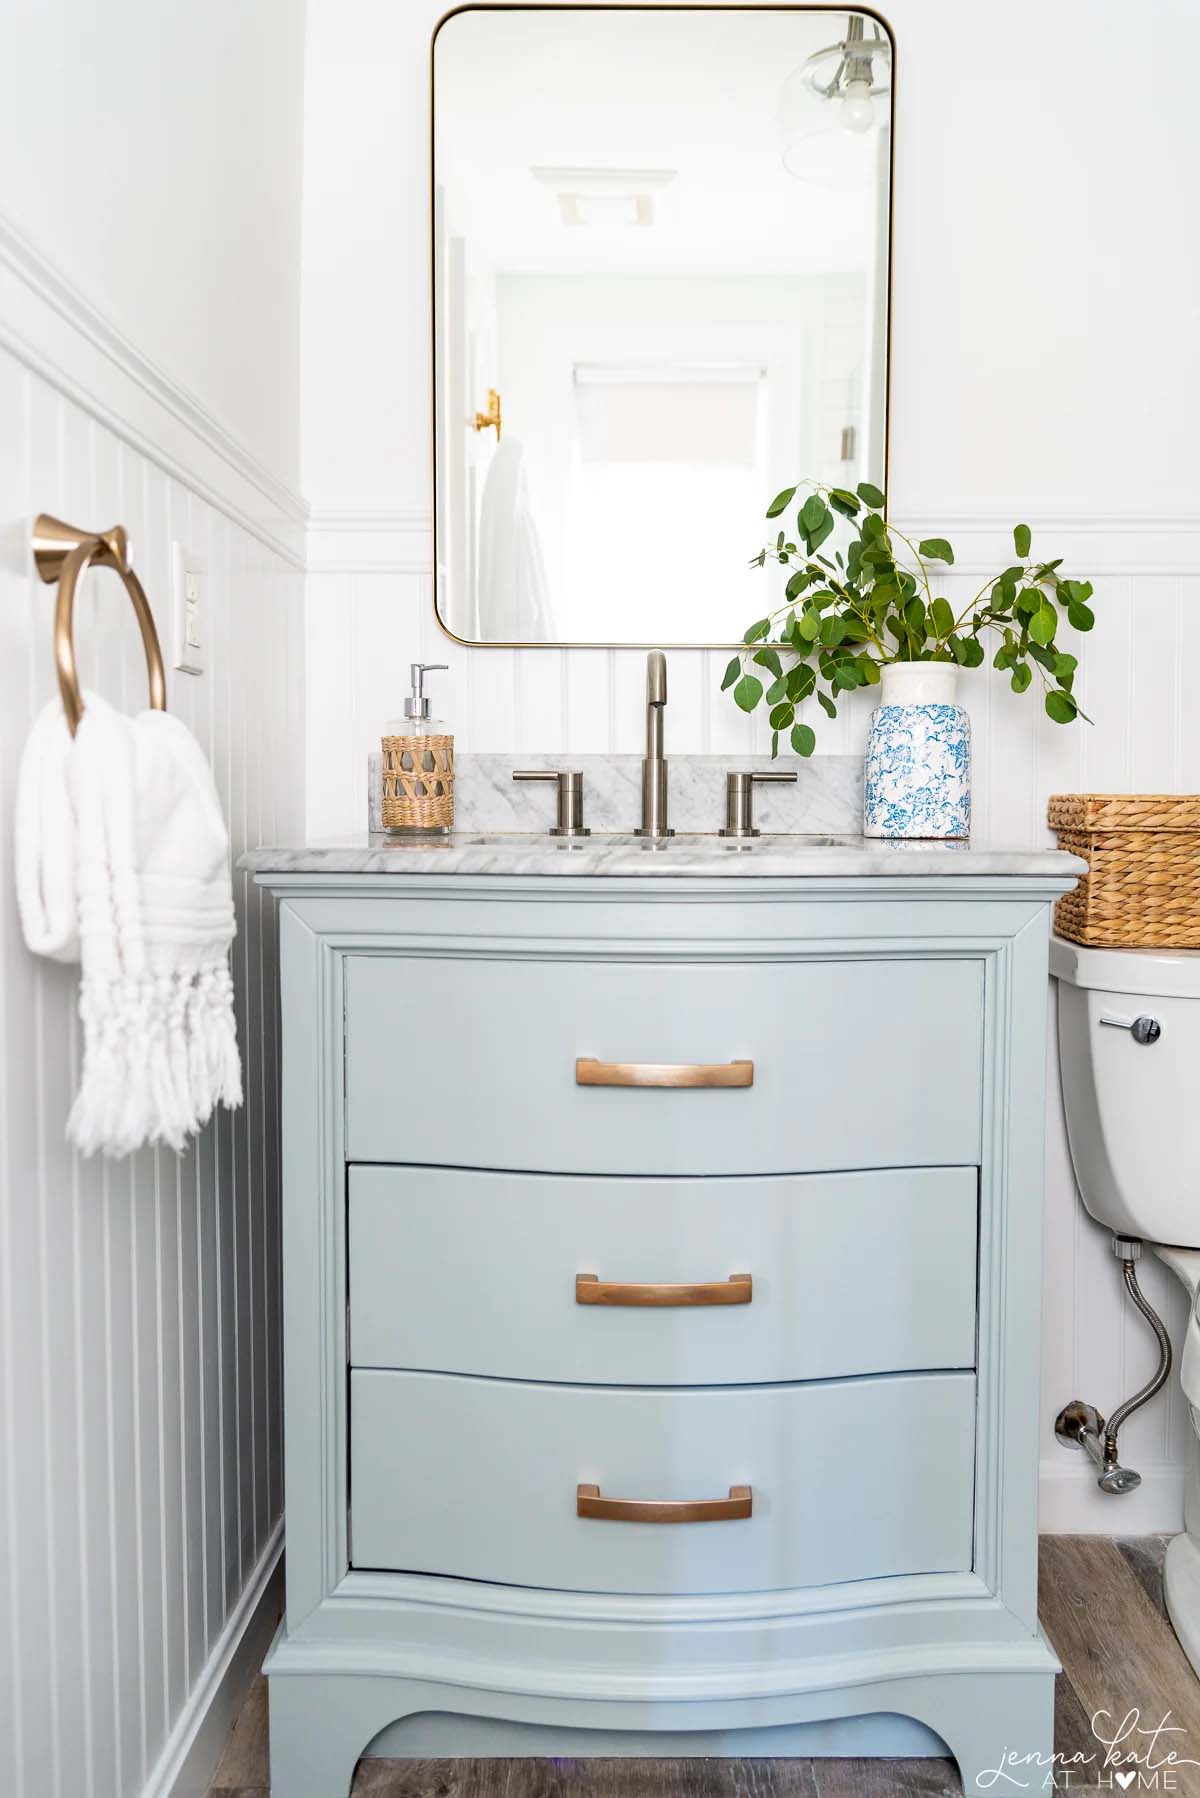 freshly painted bathroom vanity cabinet in a light blue color with marble top and brass mirror above it